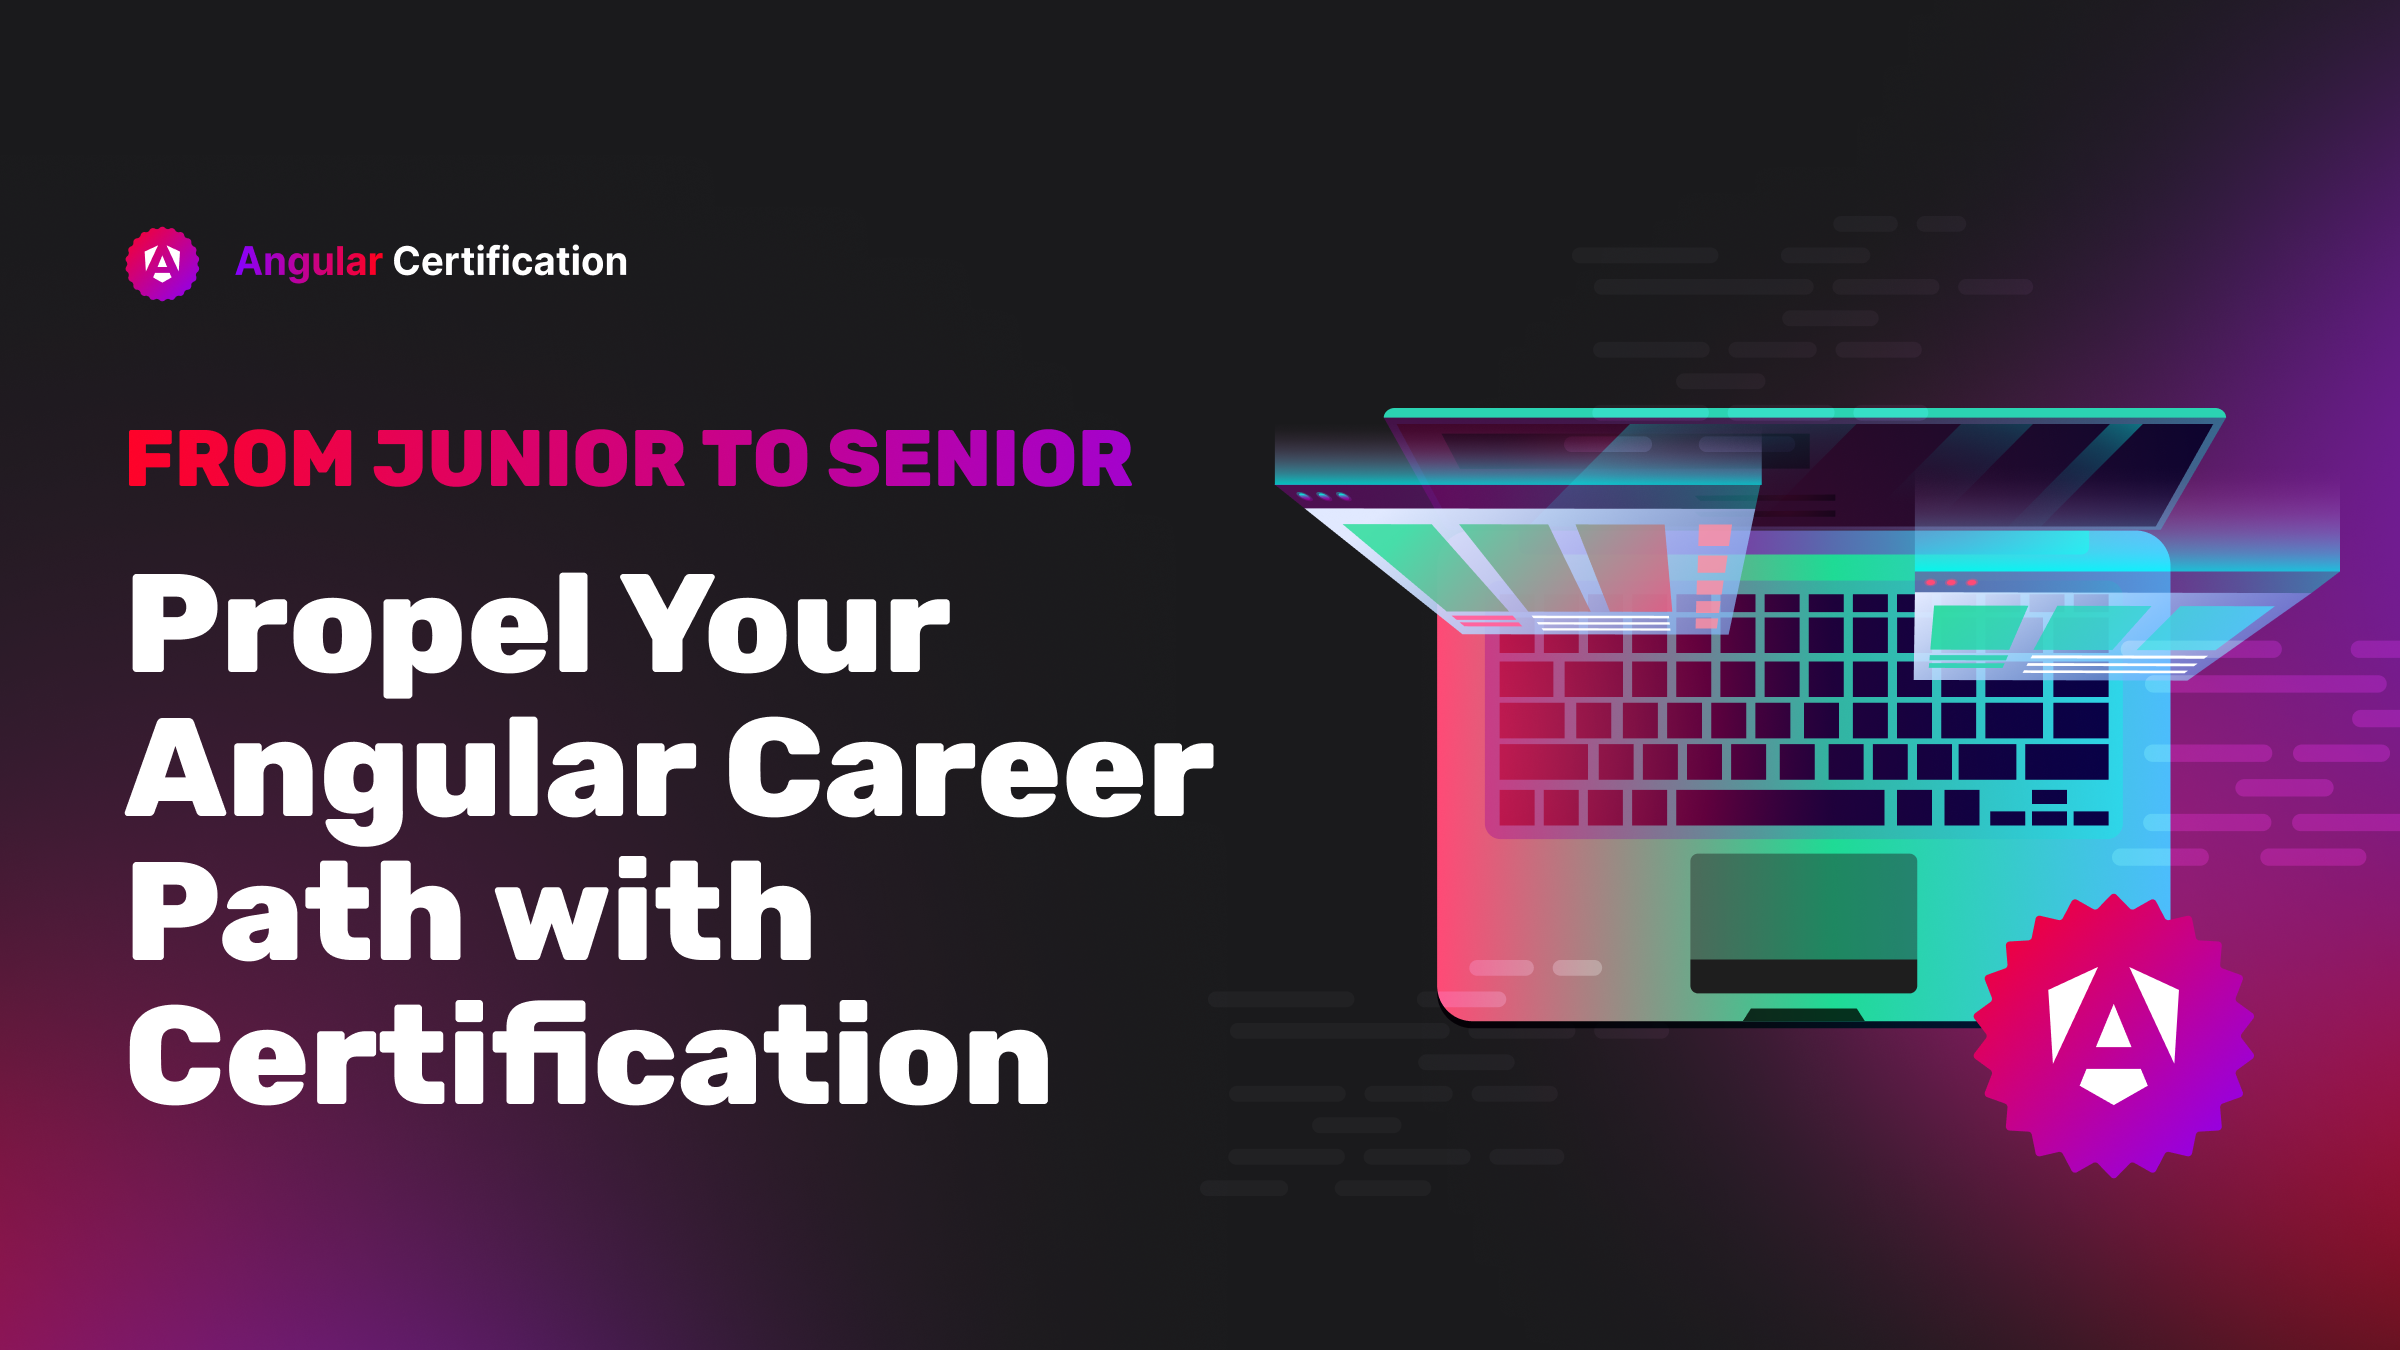 From Junior to Senior: Propel Your Angular Career Path with Certification